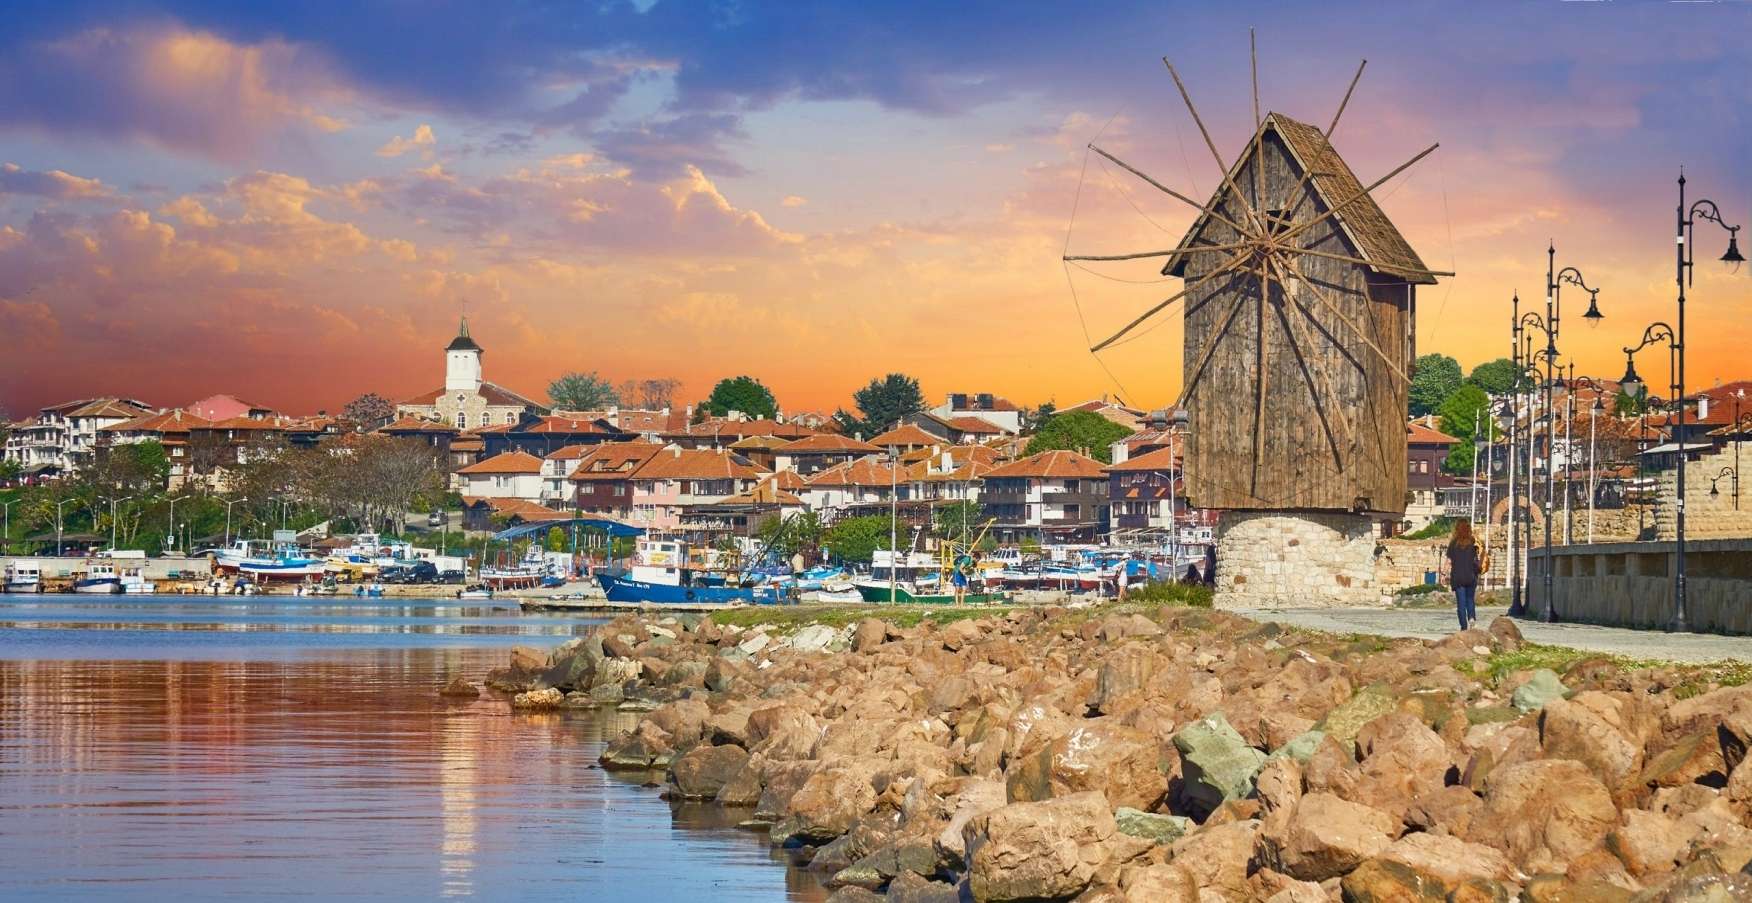 OLD TOWN OF NESSEBAR